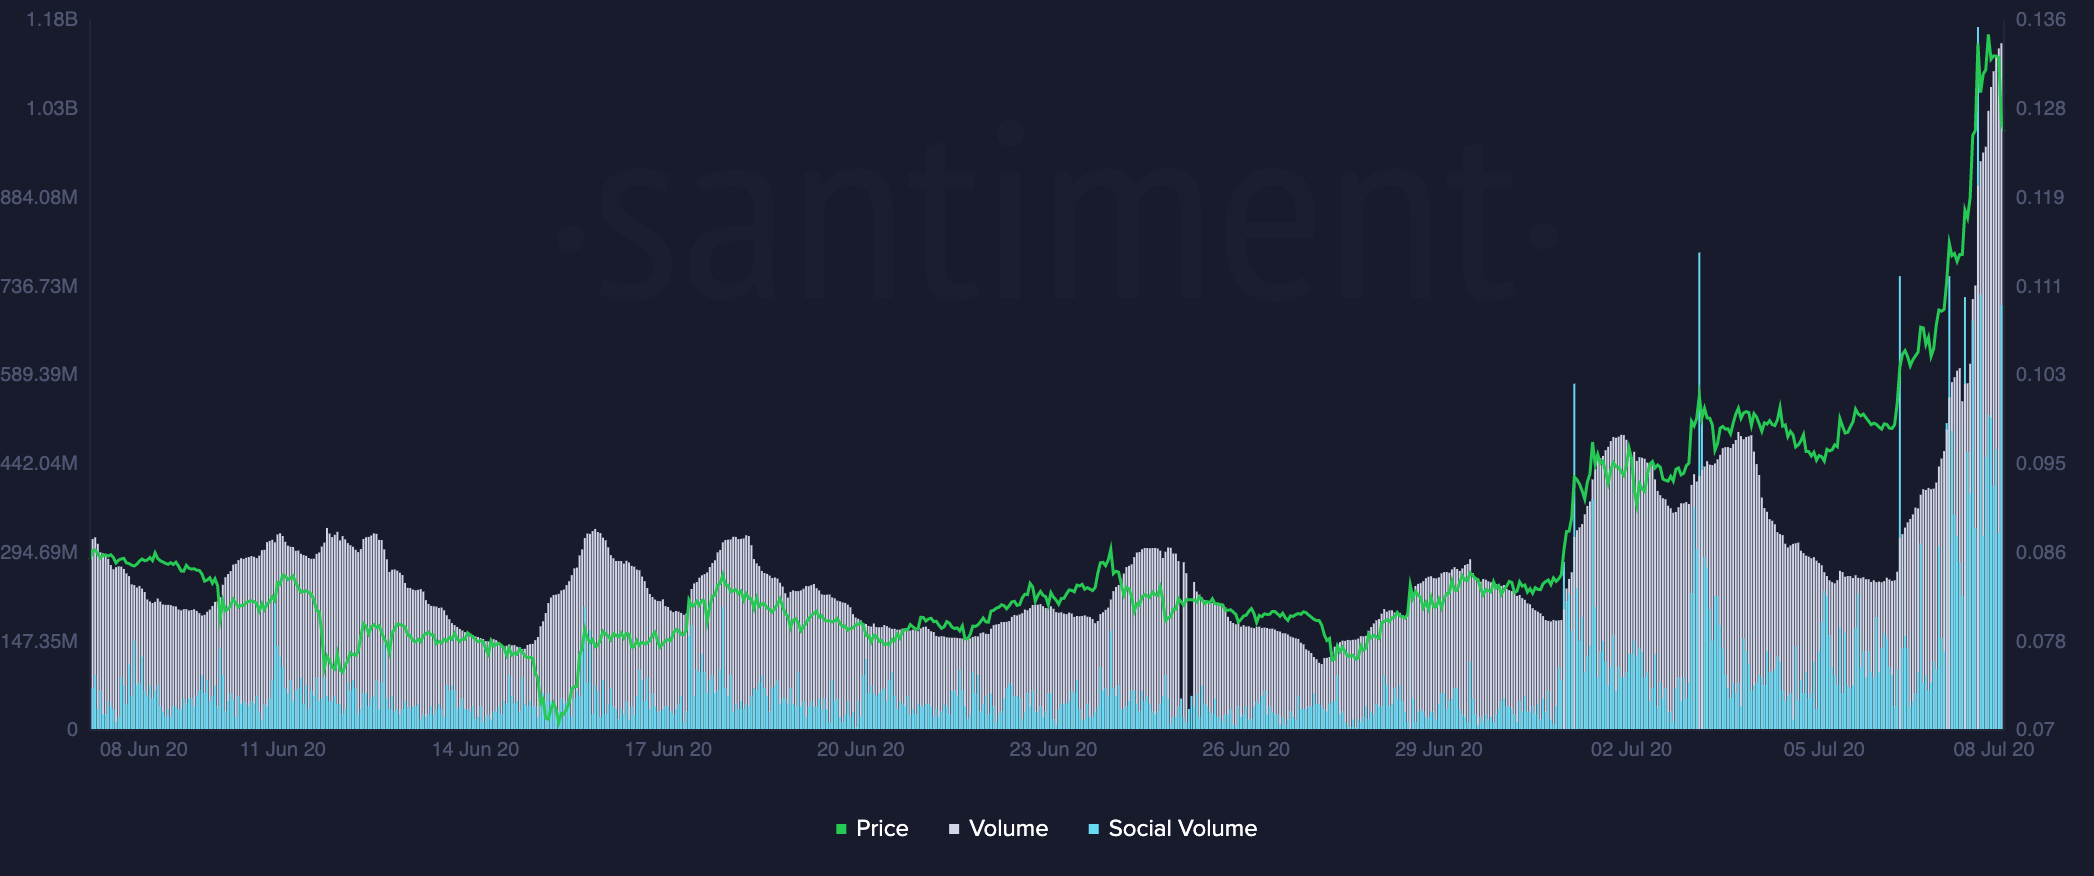 Cardano on-chain and social volume